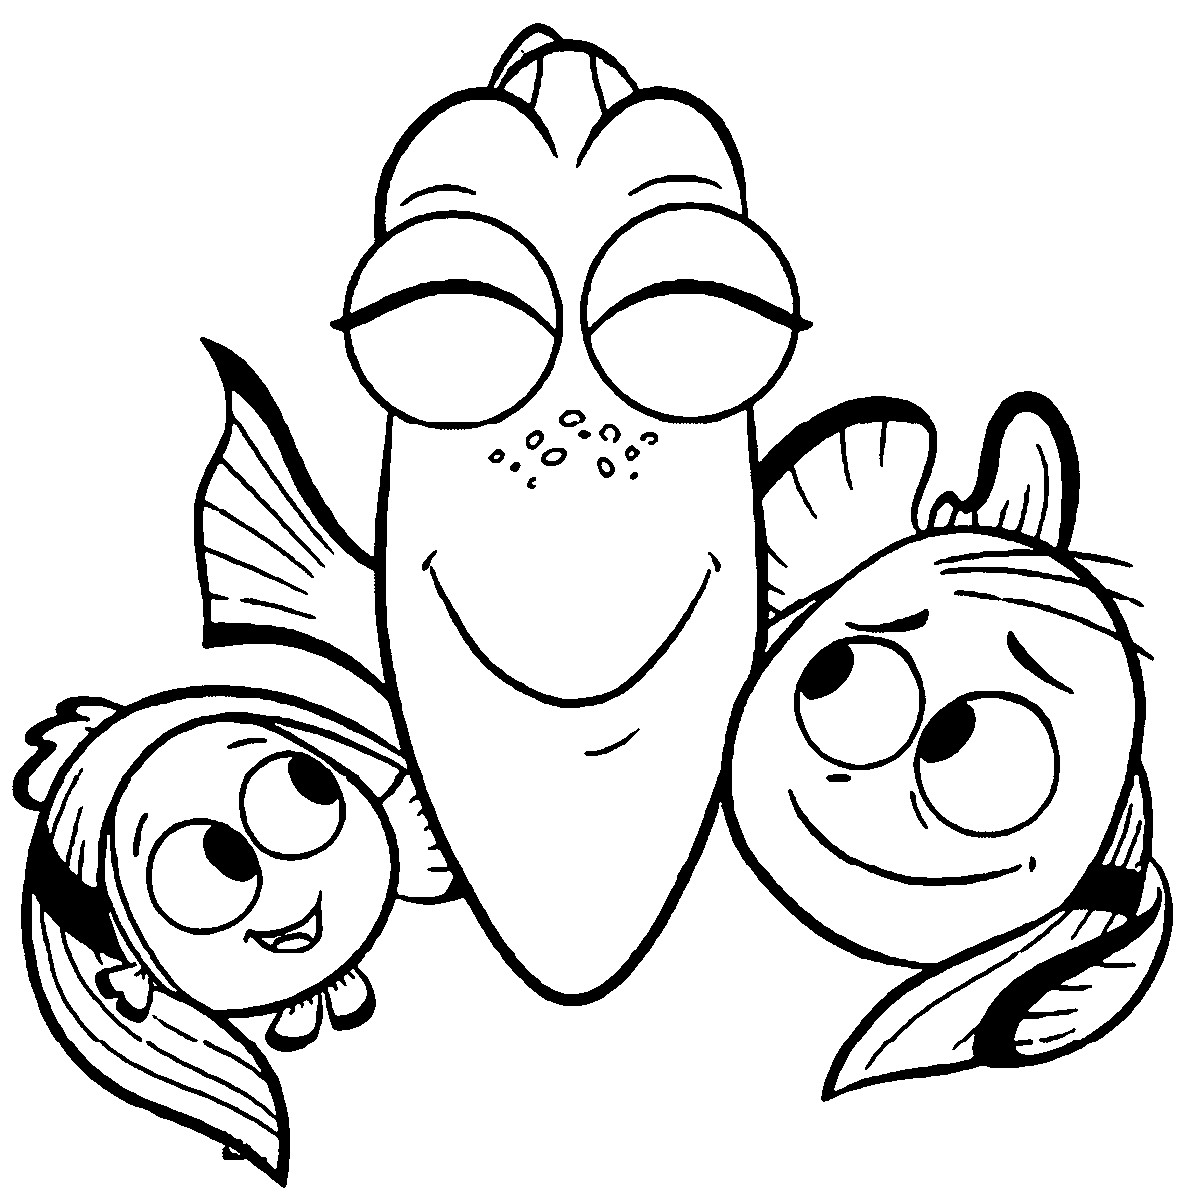 Baby Dory Coloring Pages
 Dory Coloring Pages Best Coloring Pages For Kids